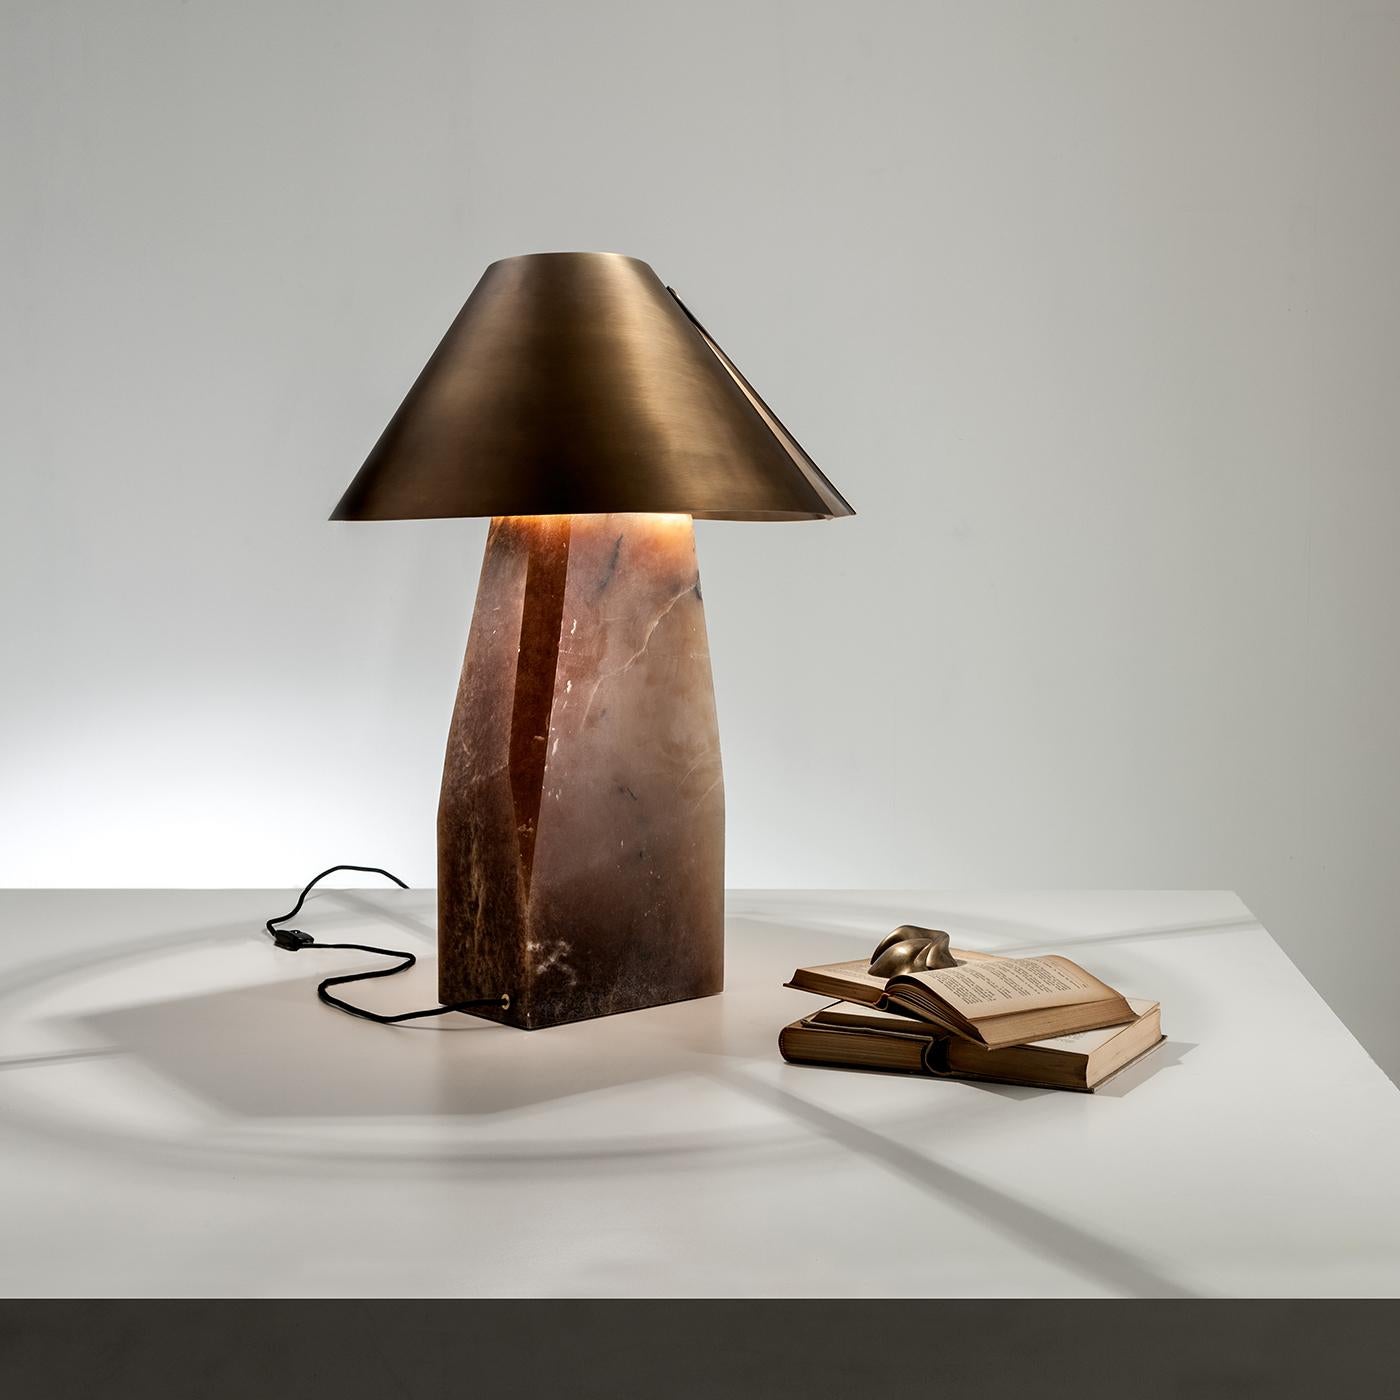 This astonishing Ada table lamp by Cesare Arosio combines ancient and modern elements in a design of timeless elegance and visual allure. The sculptural alabaster base supports an exquisite satin-burnished brass coolie lampshade. A polyhedral form